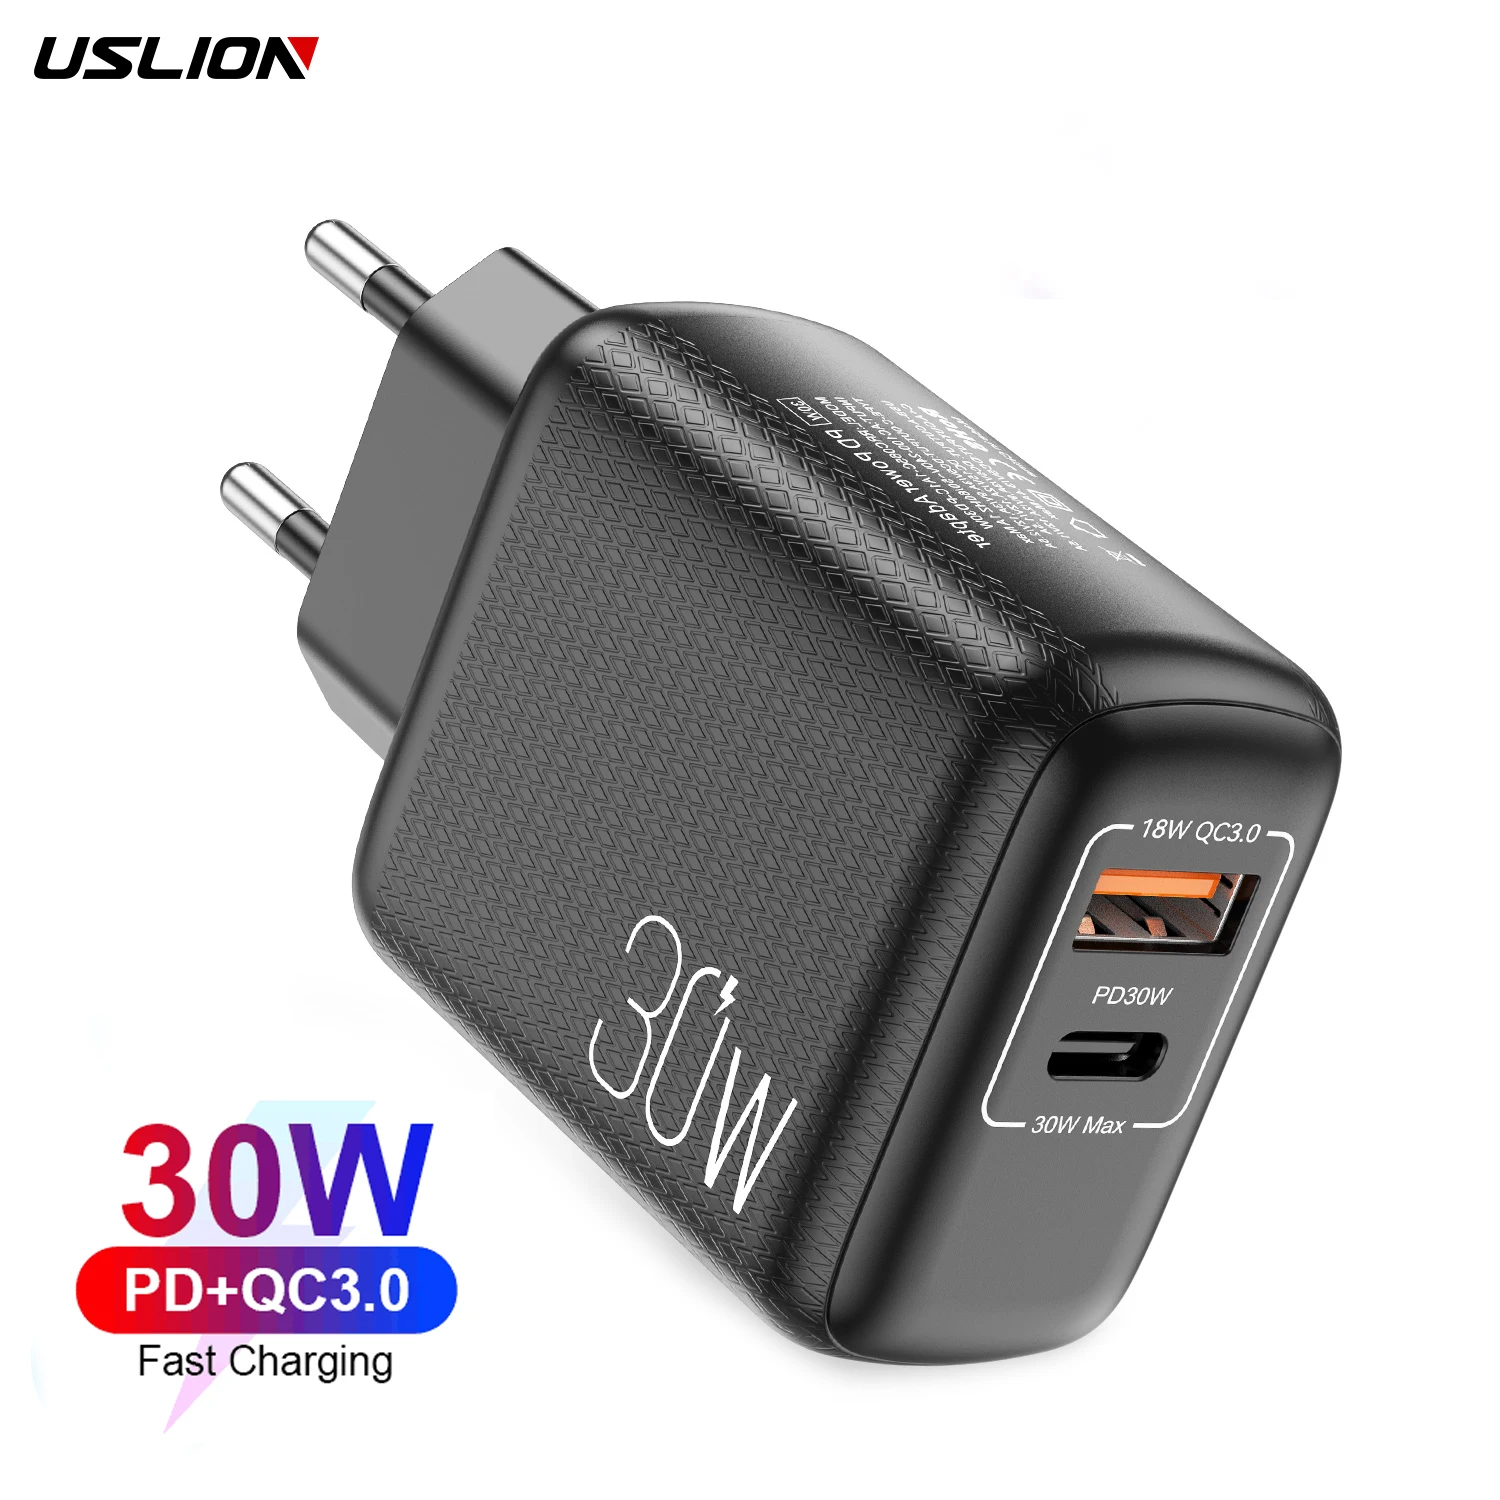 

USLION Amazon 30W PD+QC3.0 USB Type C Dual Port Fast Wall Charger Portable Mobile Phone Adapter For iPhone 13 12 for Samsung